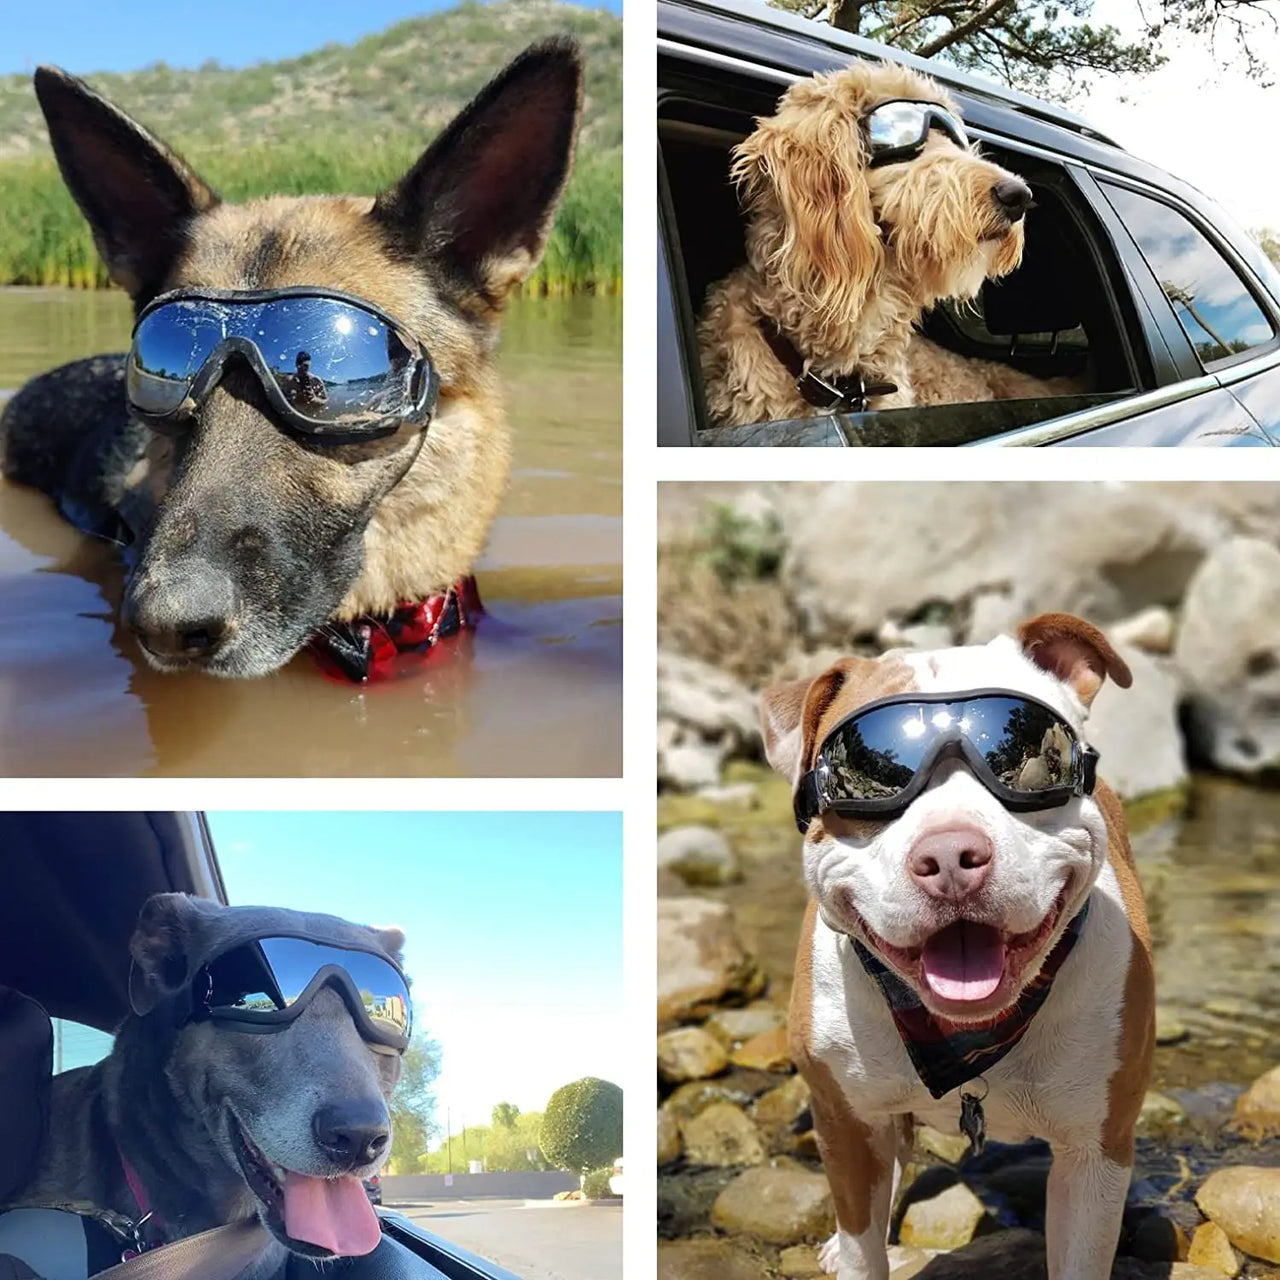 2PCS Protective Goggles for Dogs and Cats - Sunglasses - UV Protection - Cool Glasses for Small Dogs - Outdoor Riding 138